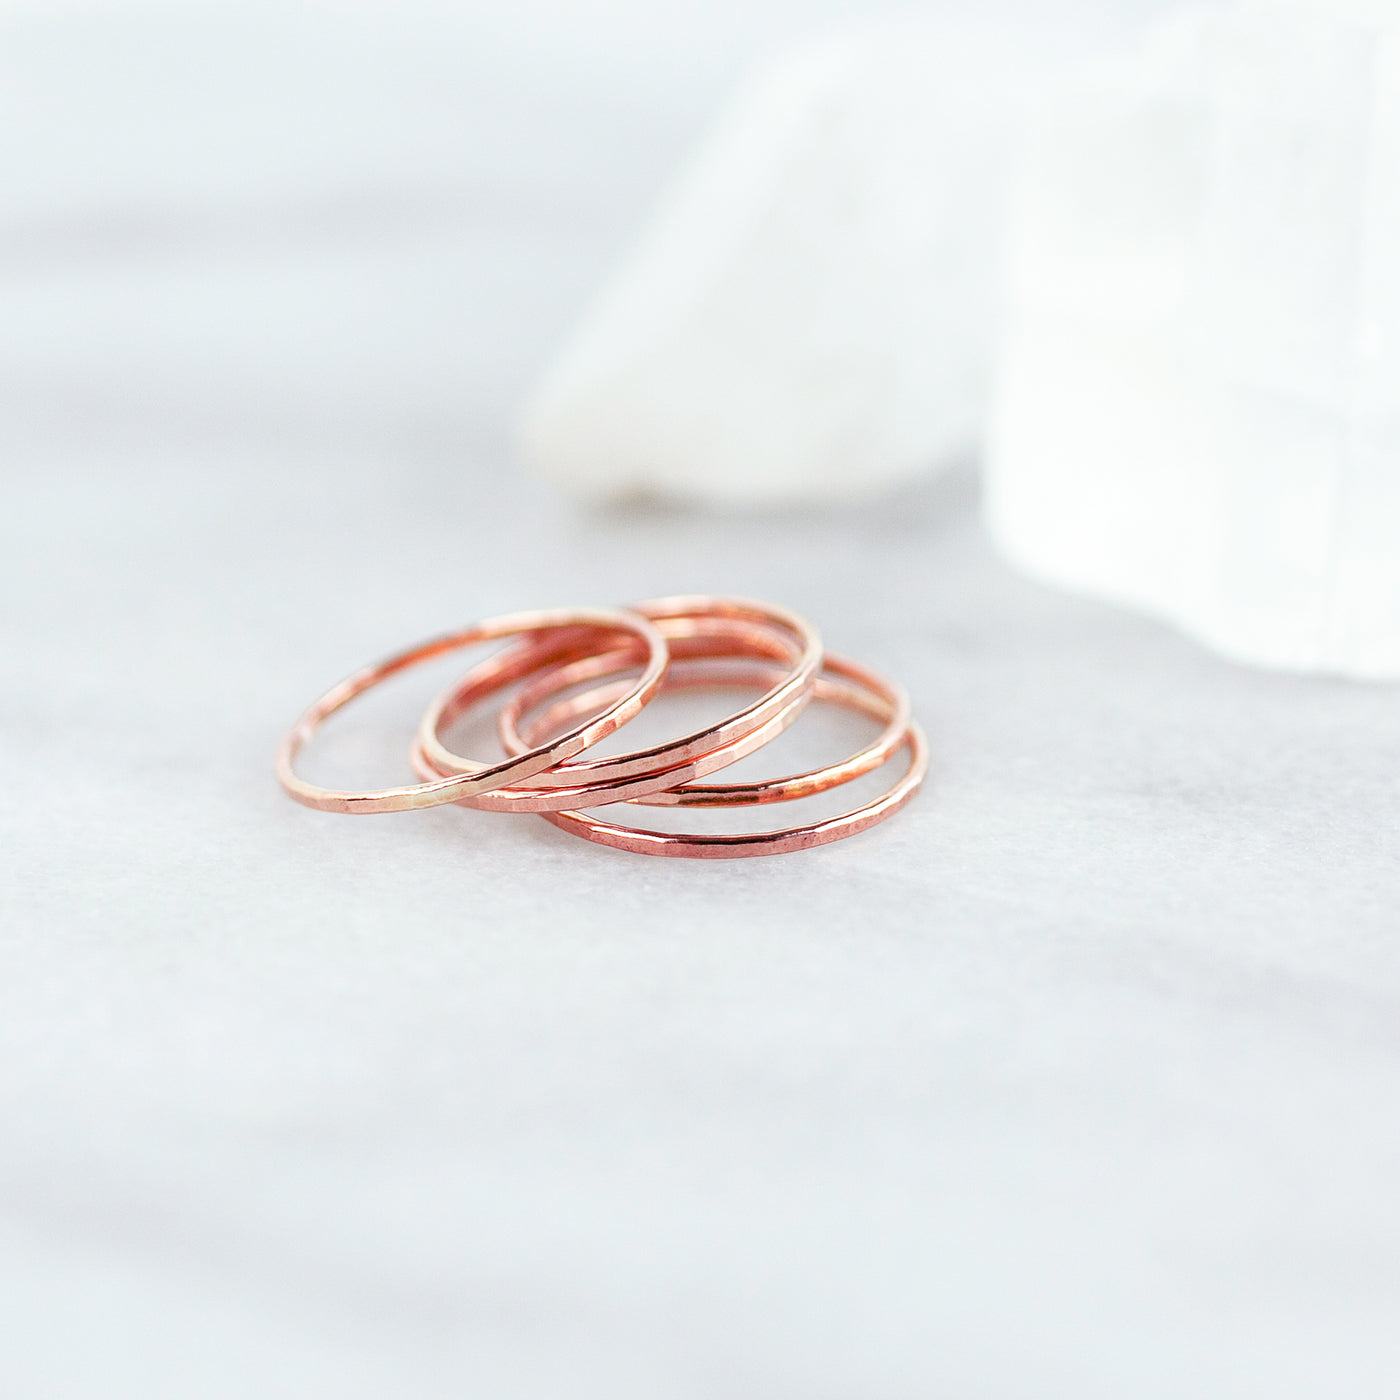 Faceted Stacking Ring - 14k Rose Gold Fill